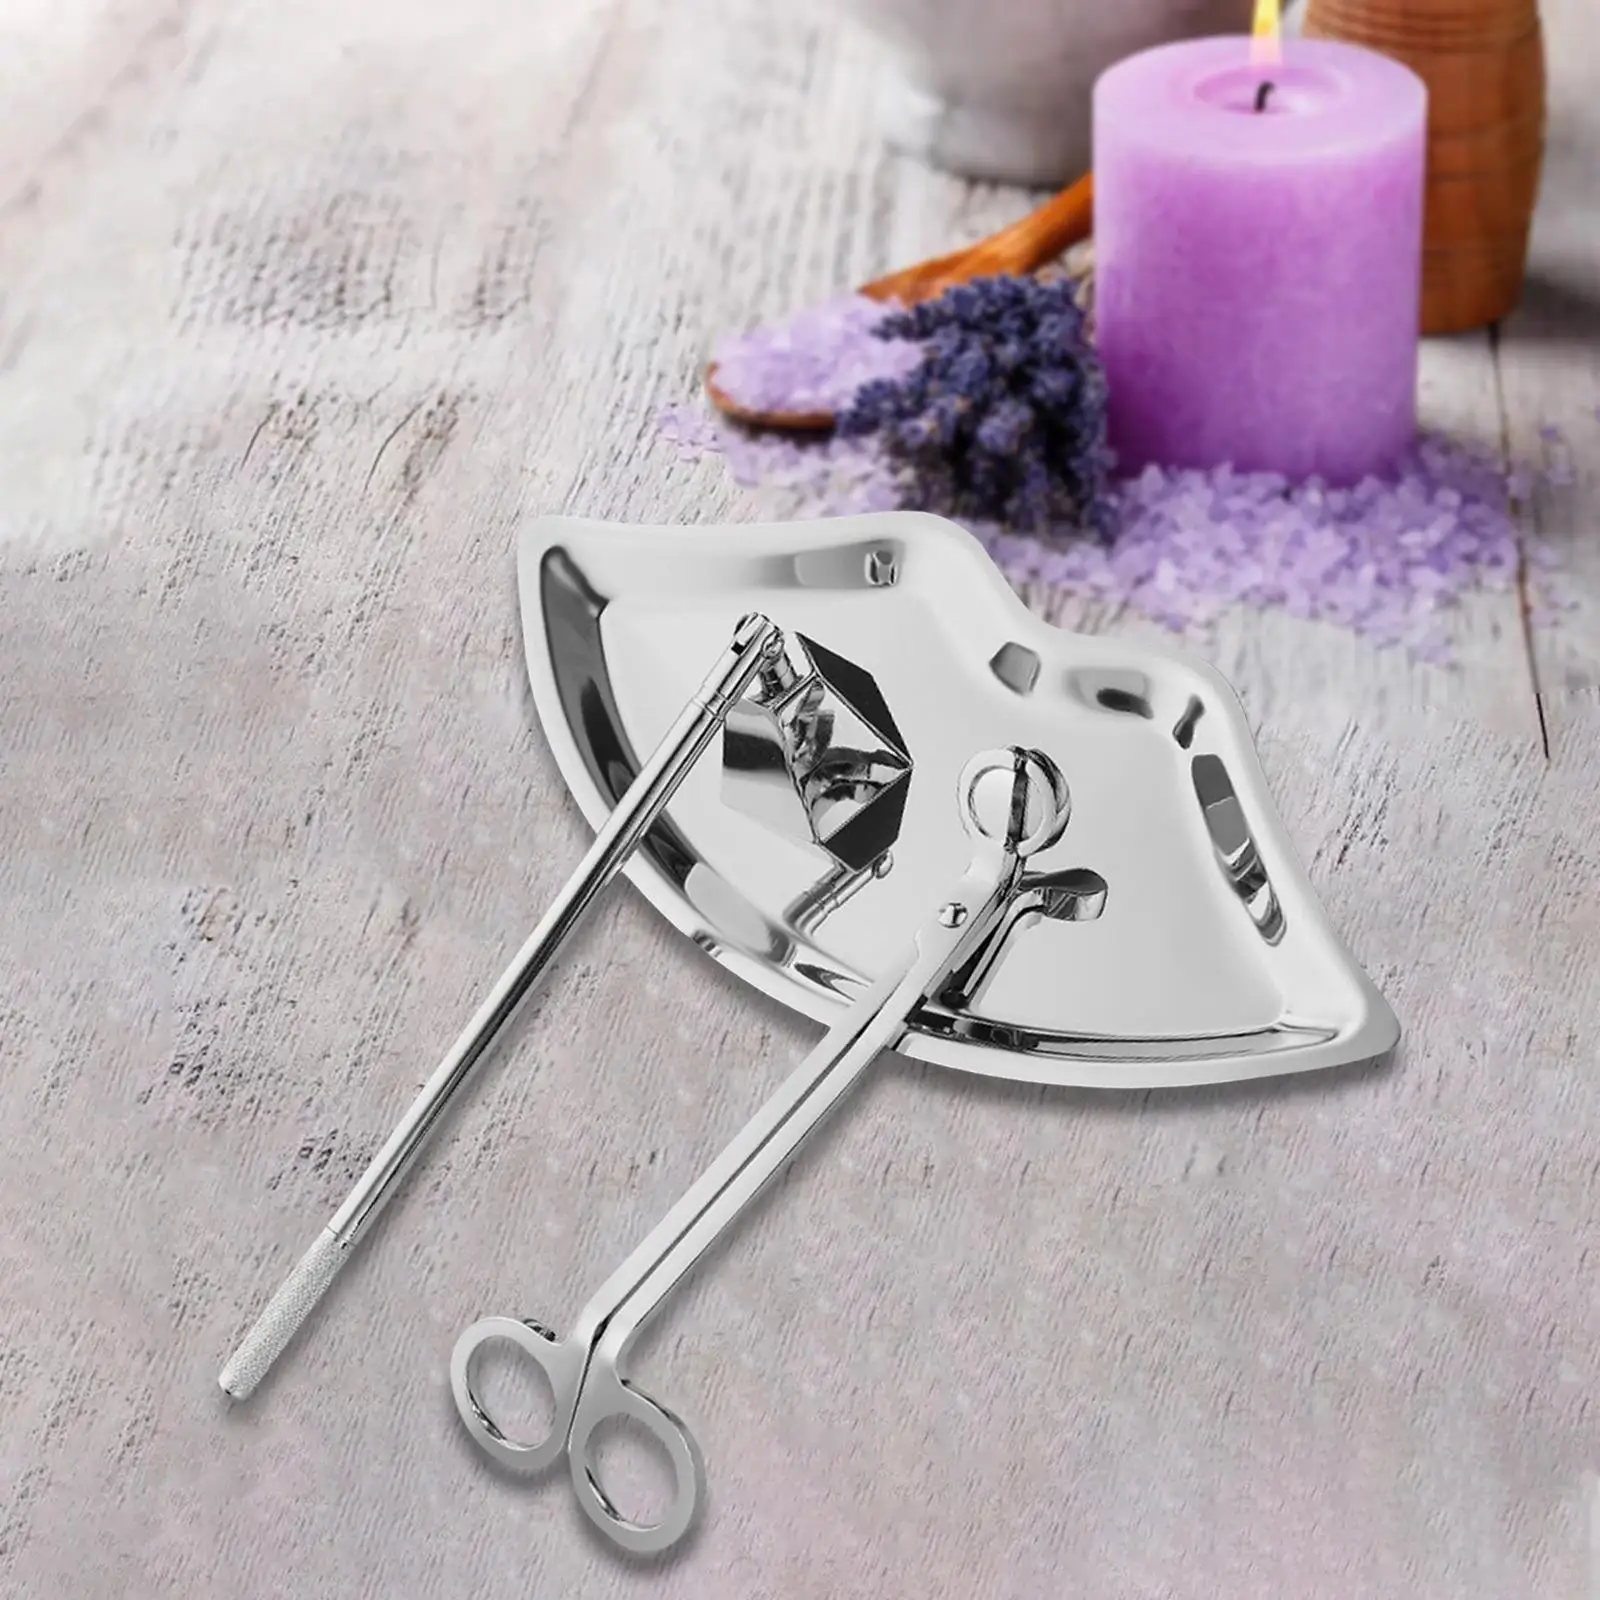 3 in 1 Candle Accessory Set Wick Trimmer Wick Flame Snuffer Candle Extinguisher Set Tray for Christmas Thanksgiving Jar Candles